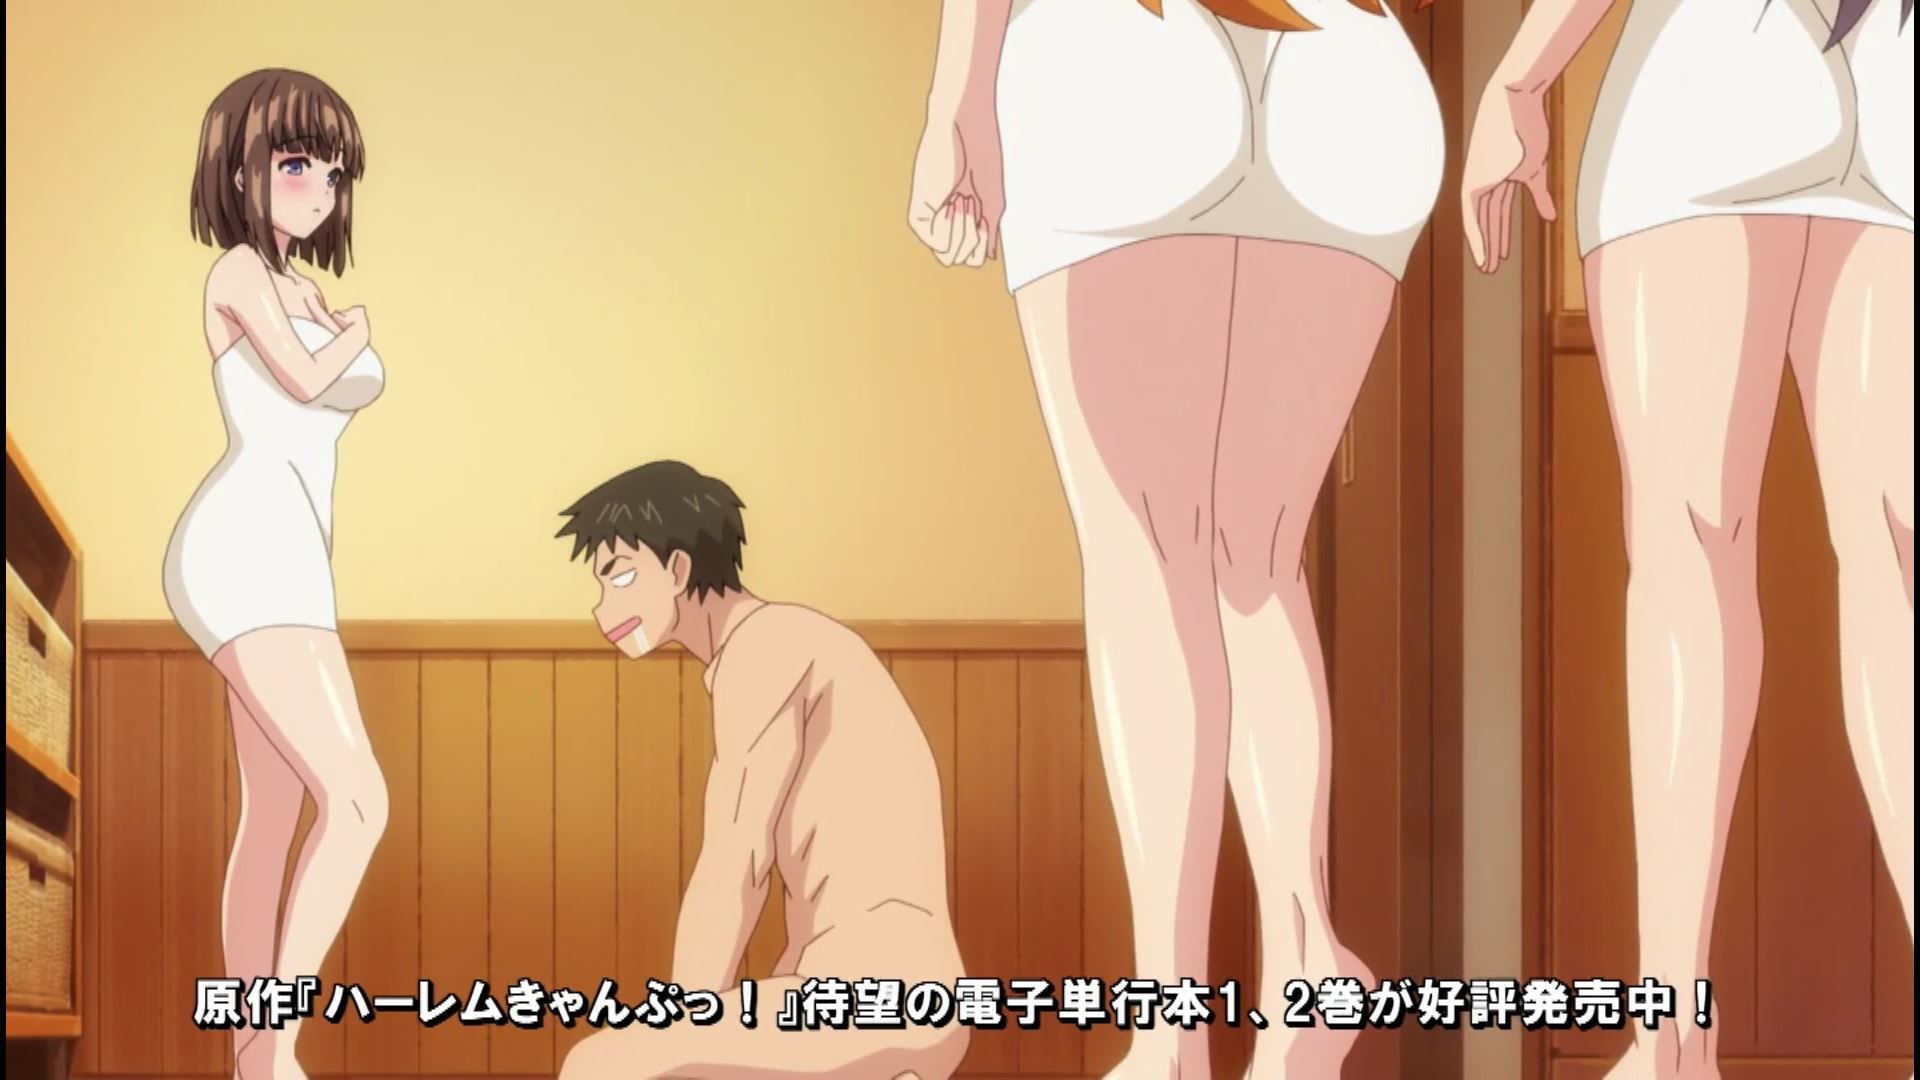 The scene where you have sex with 3 girls in episode 6 of the anime "Harem Kyampu!" 9